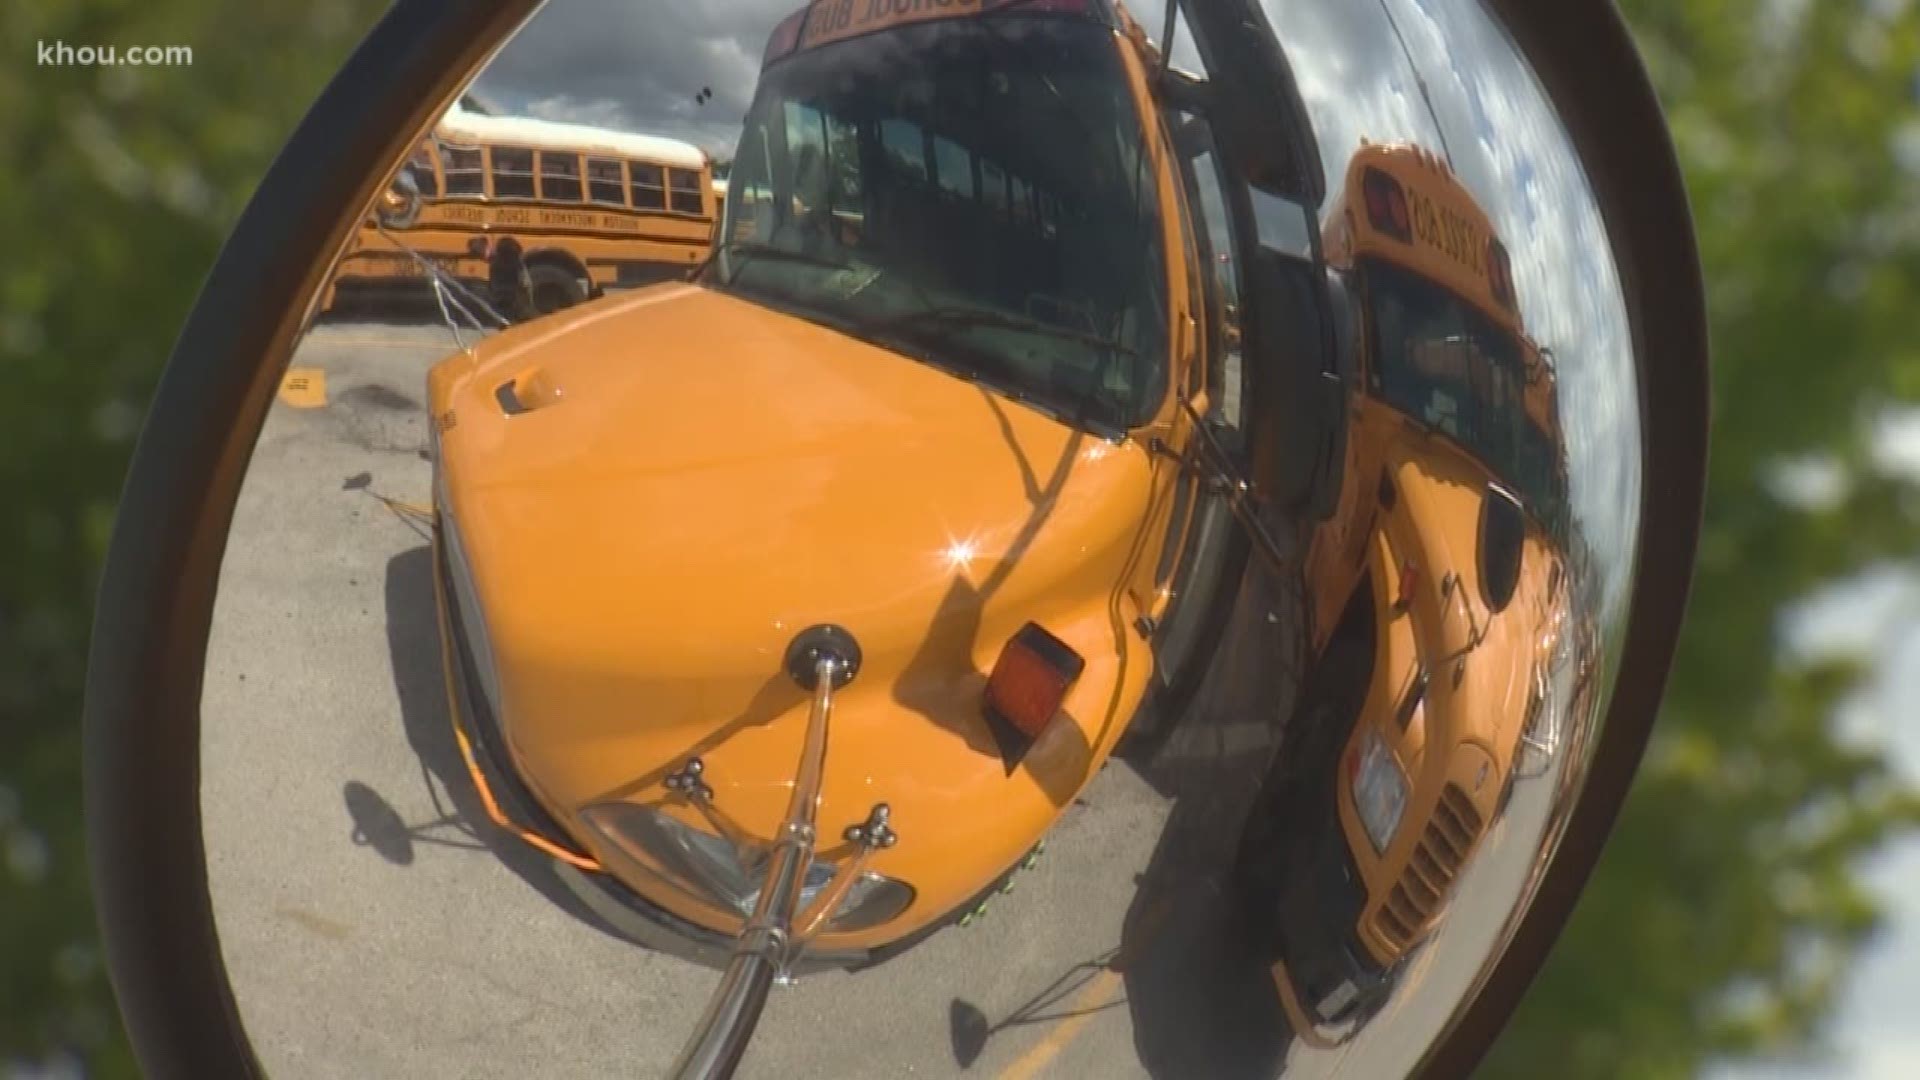 HISD, Texas' largest school district, is being taken over by the state. What's next? KHOU 11's Jason Miles explains.